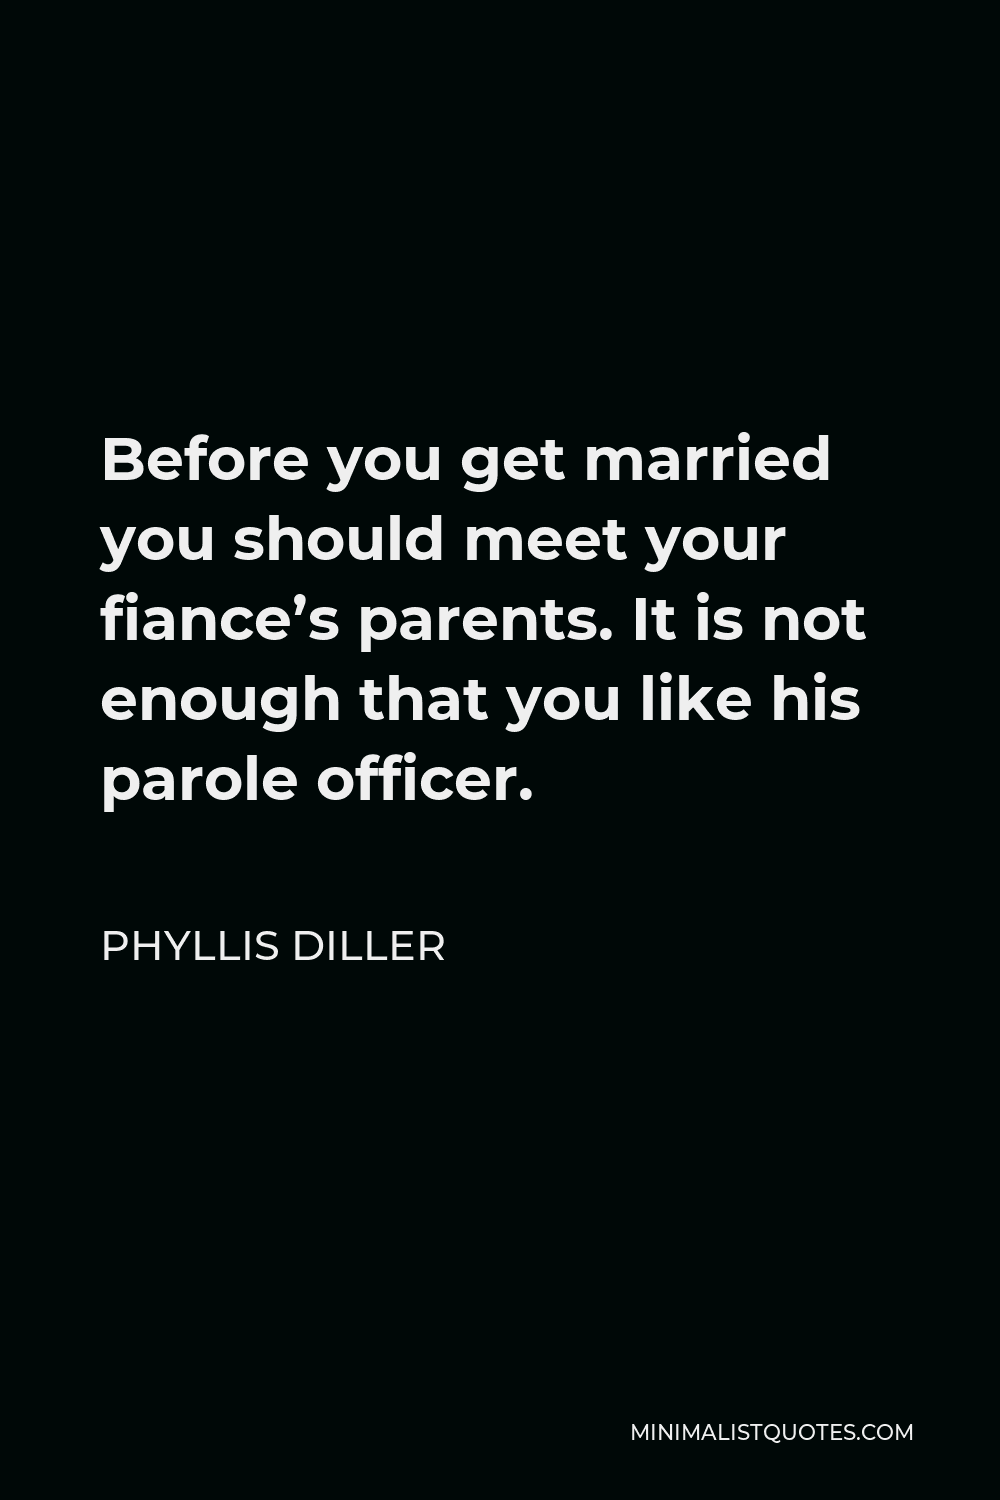 Phyllis Diller Quote - Before you get married you should meet your fiance’s parents. It is not enough that you like his parole officer.